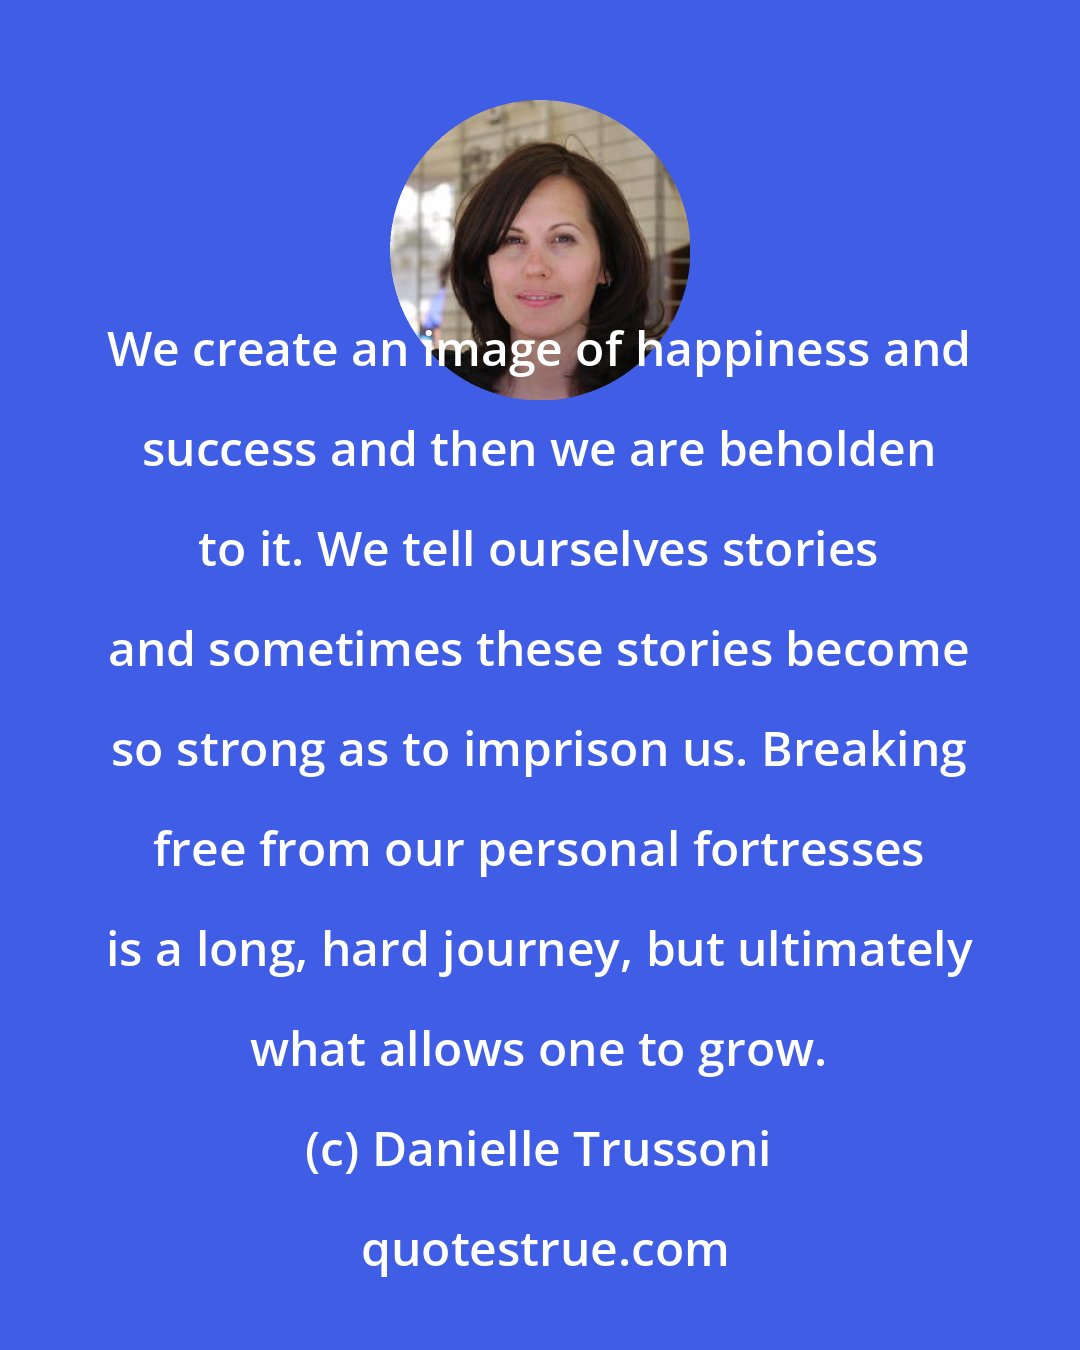 Danielle Trussoni: We create an image of happiness and success and then we are beholden to it. We tell ourselves stories and sometimes these stories become so strong as to imprison us. Breaking free from our personal fortresses is a long, hard journey, but ultimately what allows one to grow.